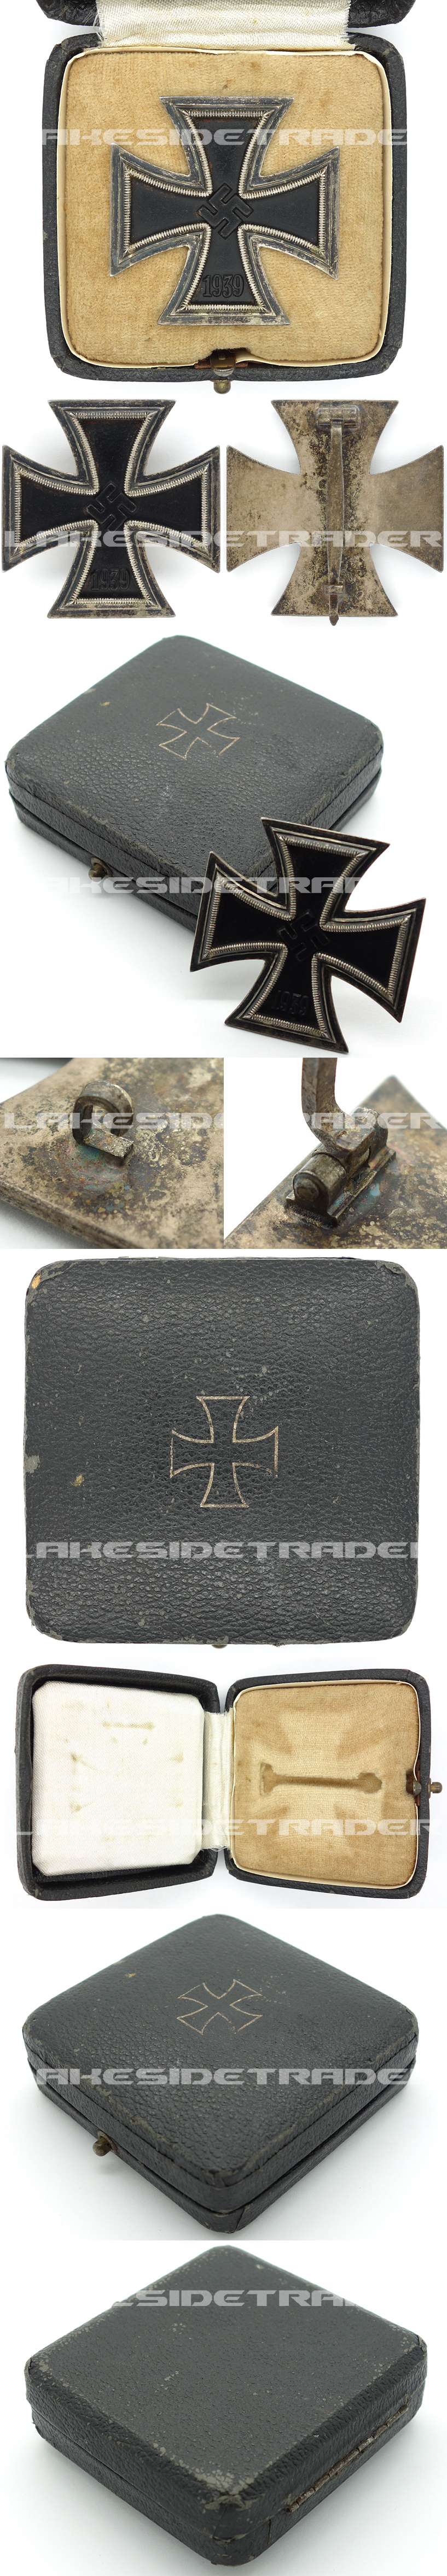 Cased 1st Class Iron Cross by R. Souval